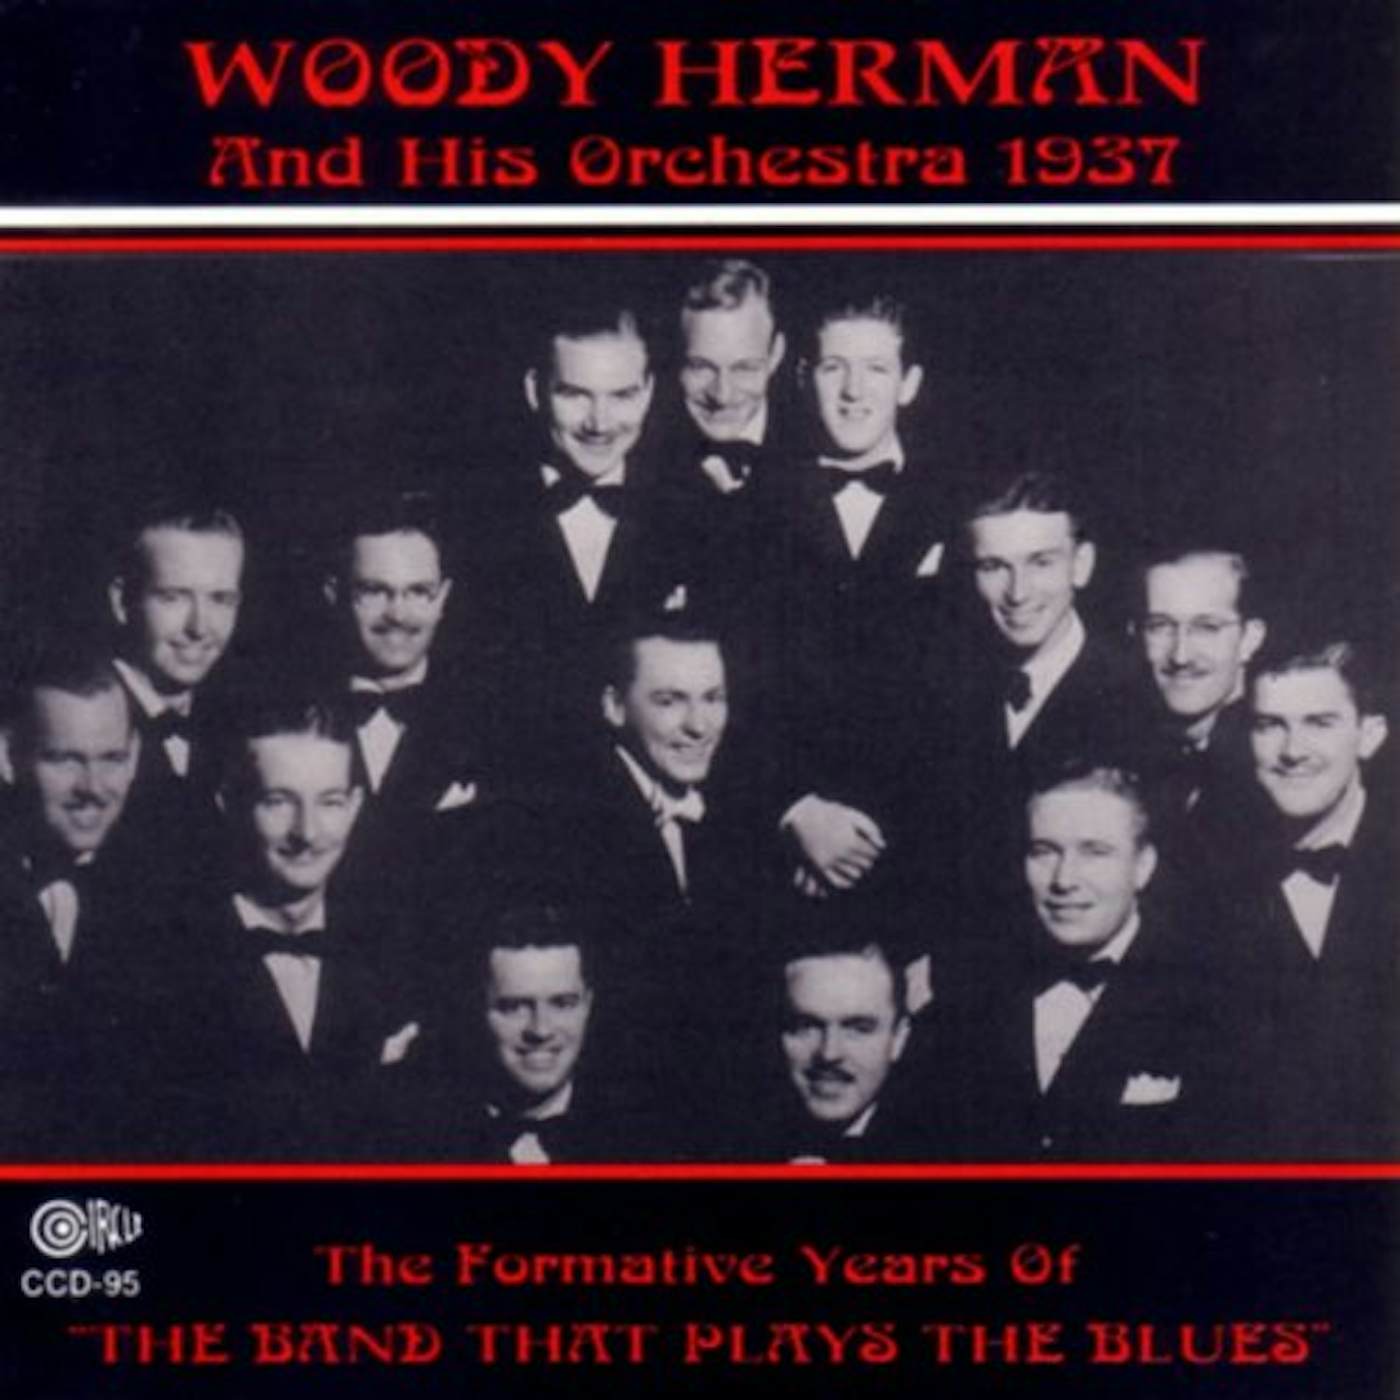 Woody Herman FORMATIVE YEARS OF THE BAND THAT PLAYS THE BLUES CD